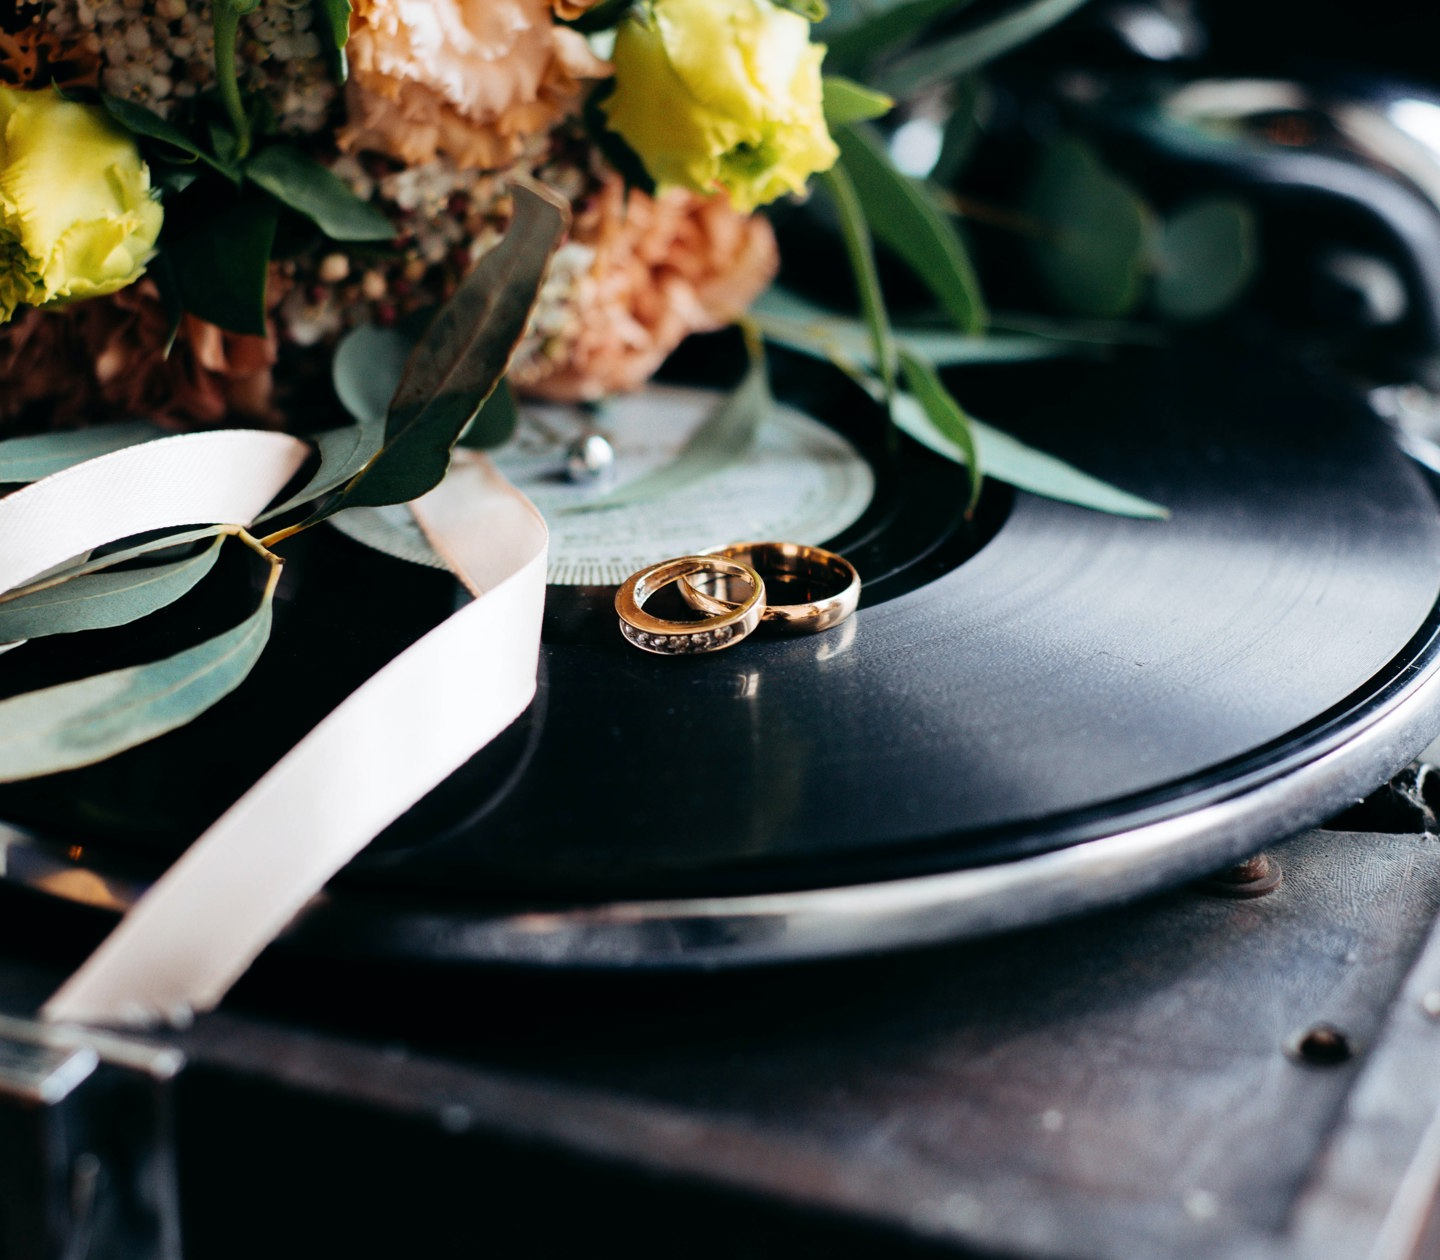 A vinyl player with flowers on top